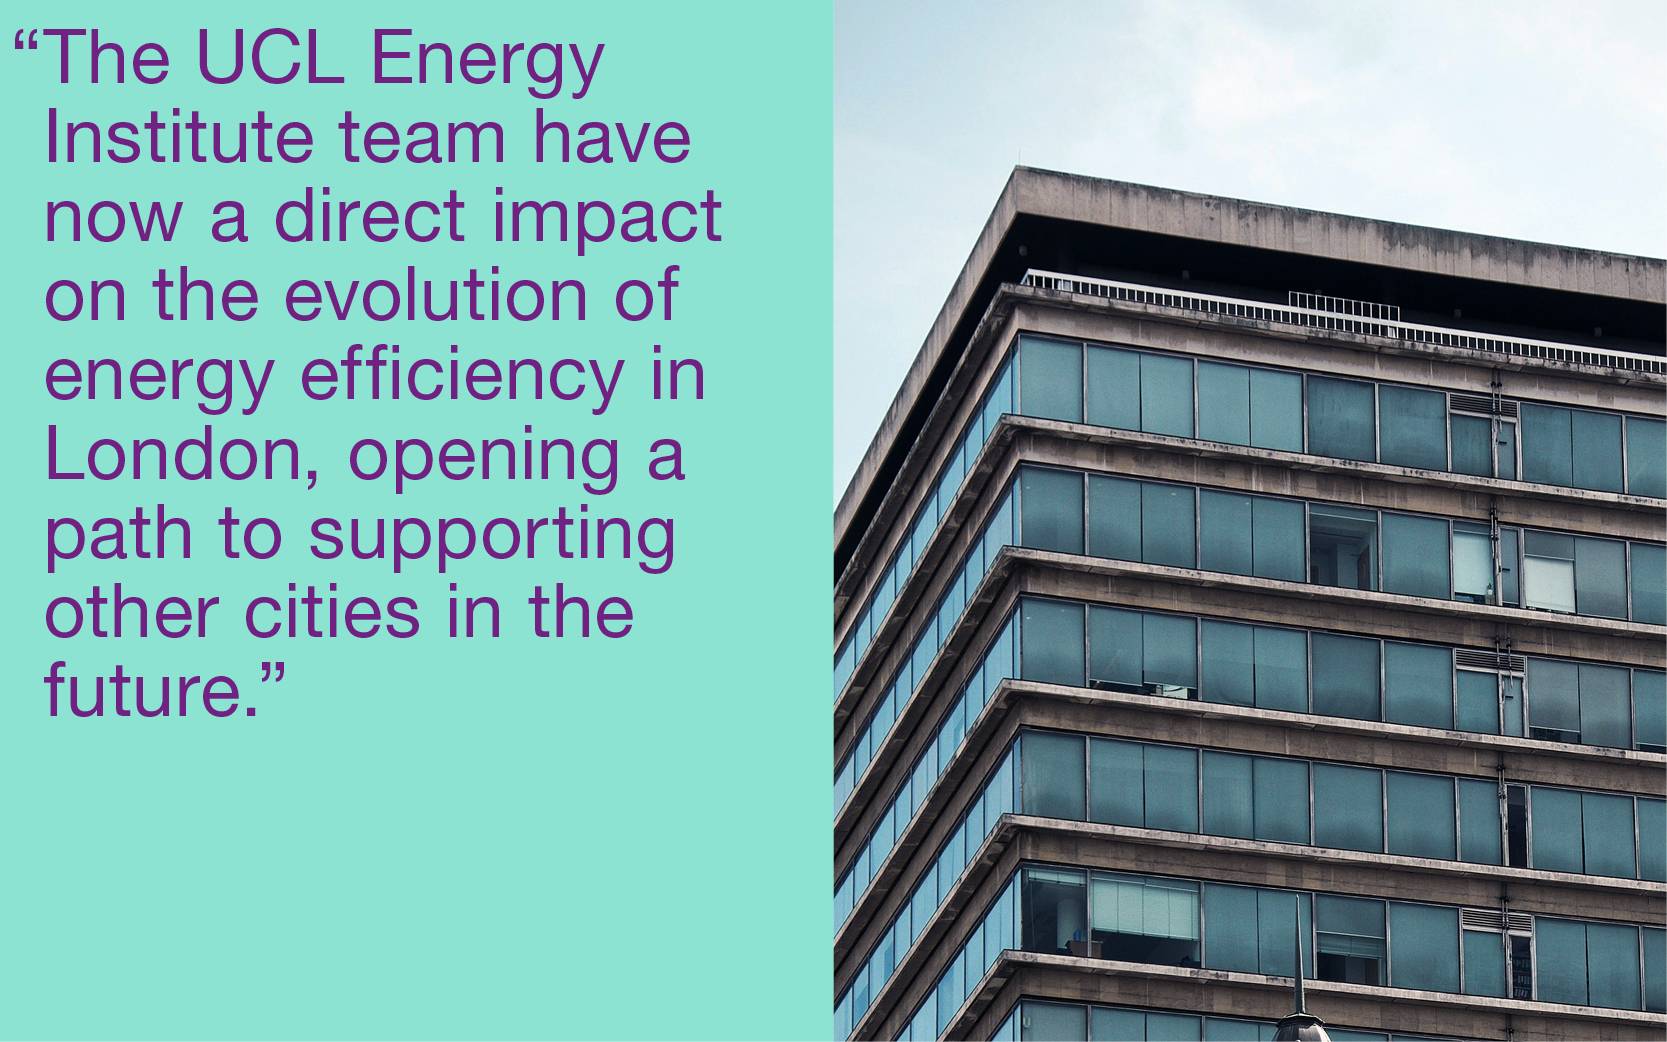 Carlos Huggins, Senior Consultancy Manager at UCLC, said: “The UCL Energy Institute team have been developing their models and accesses to underpinning robust data for years, and it is fitting that they have now a direct impact on the evolution of energy 